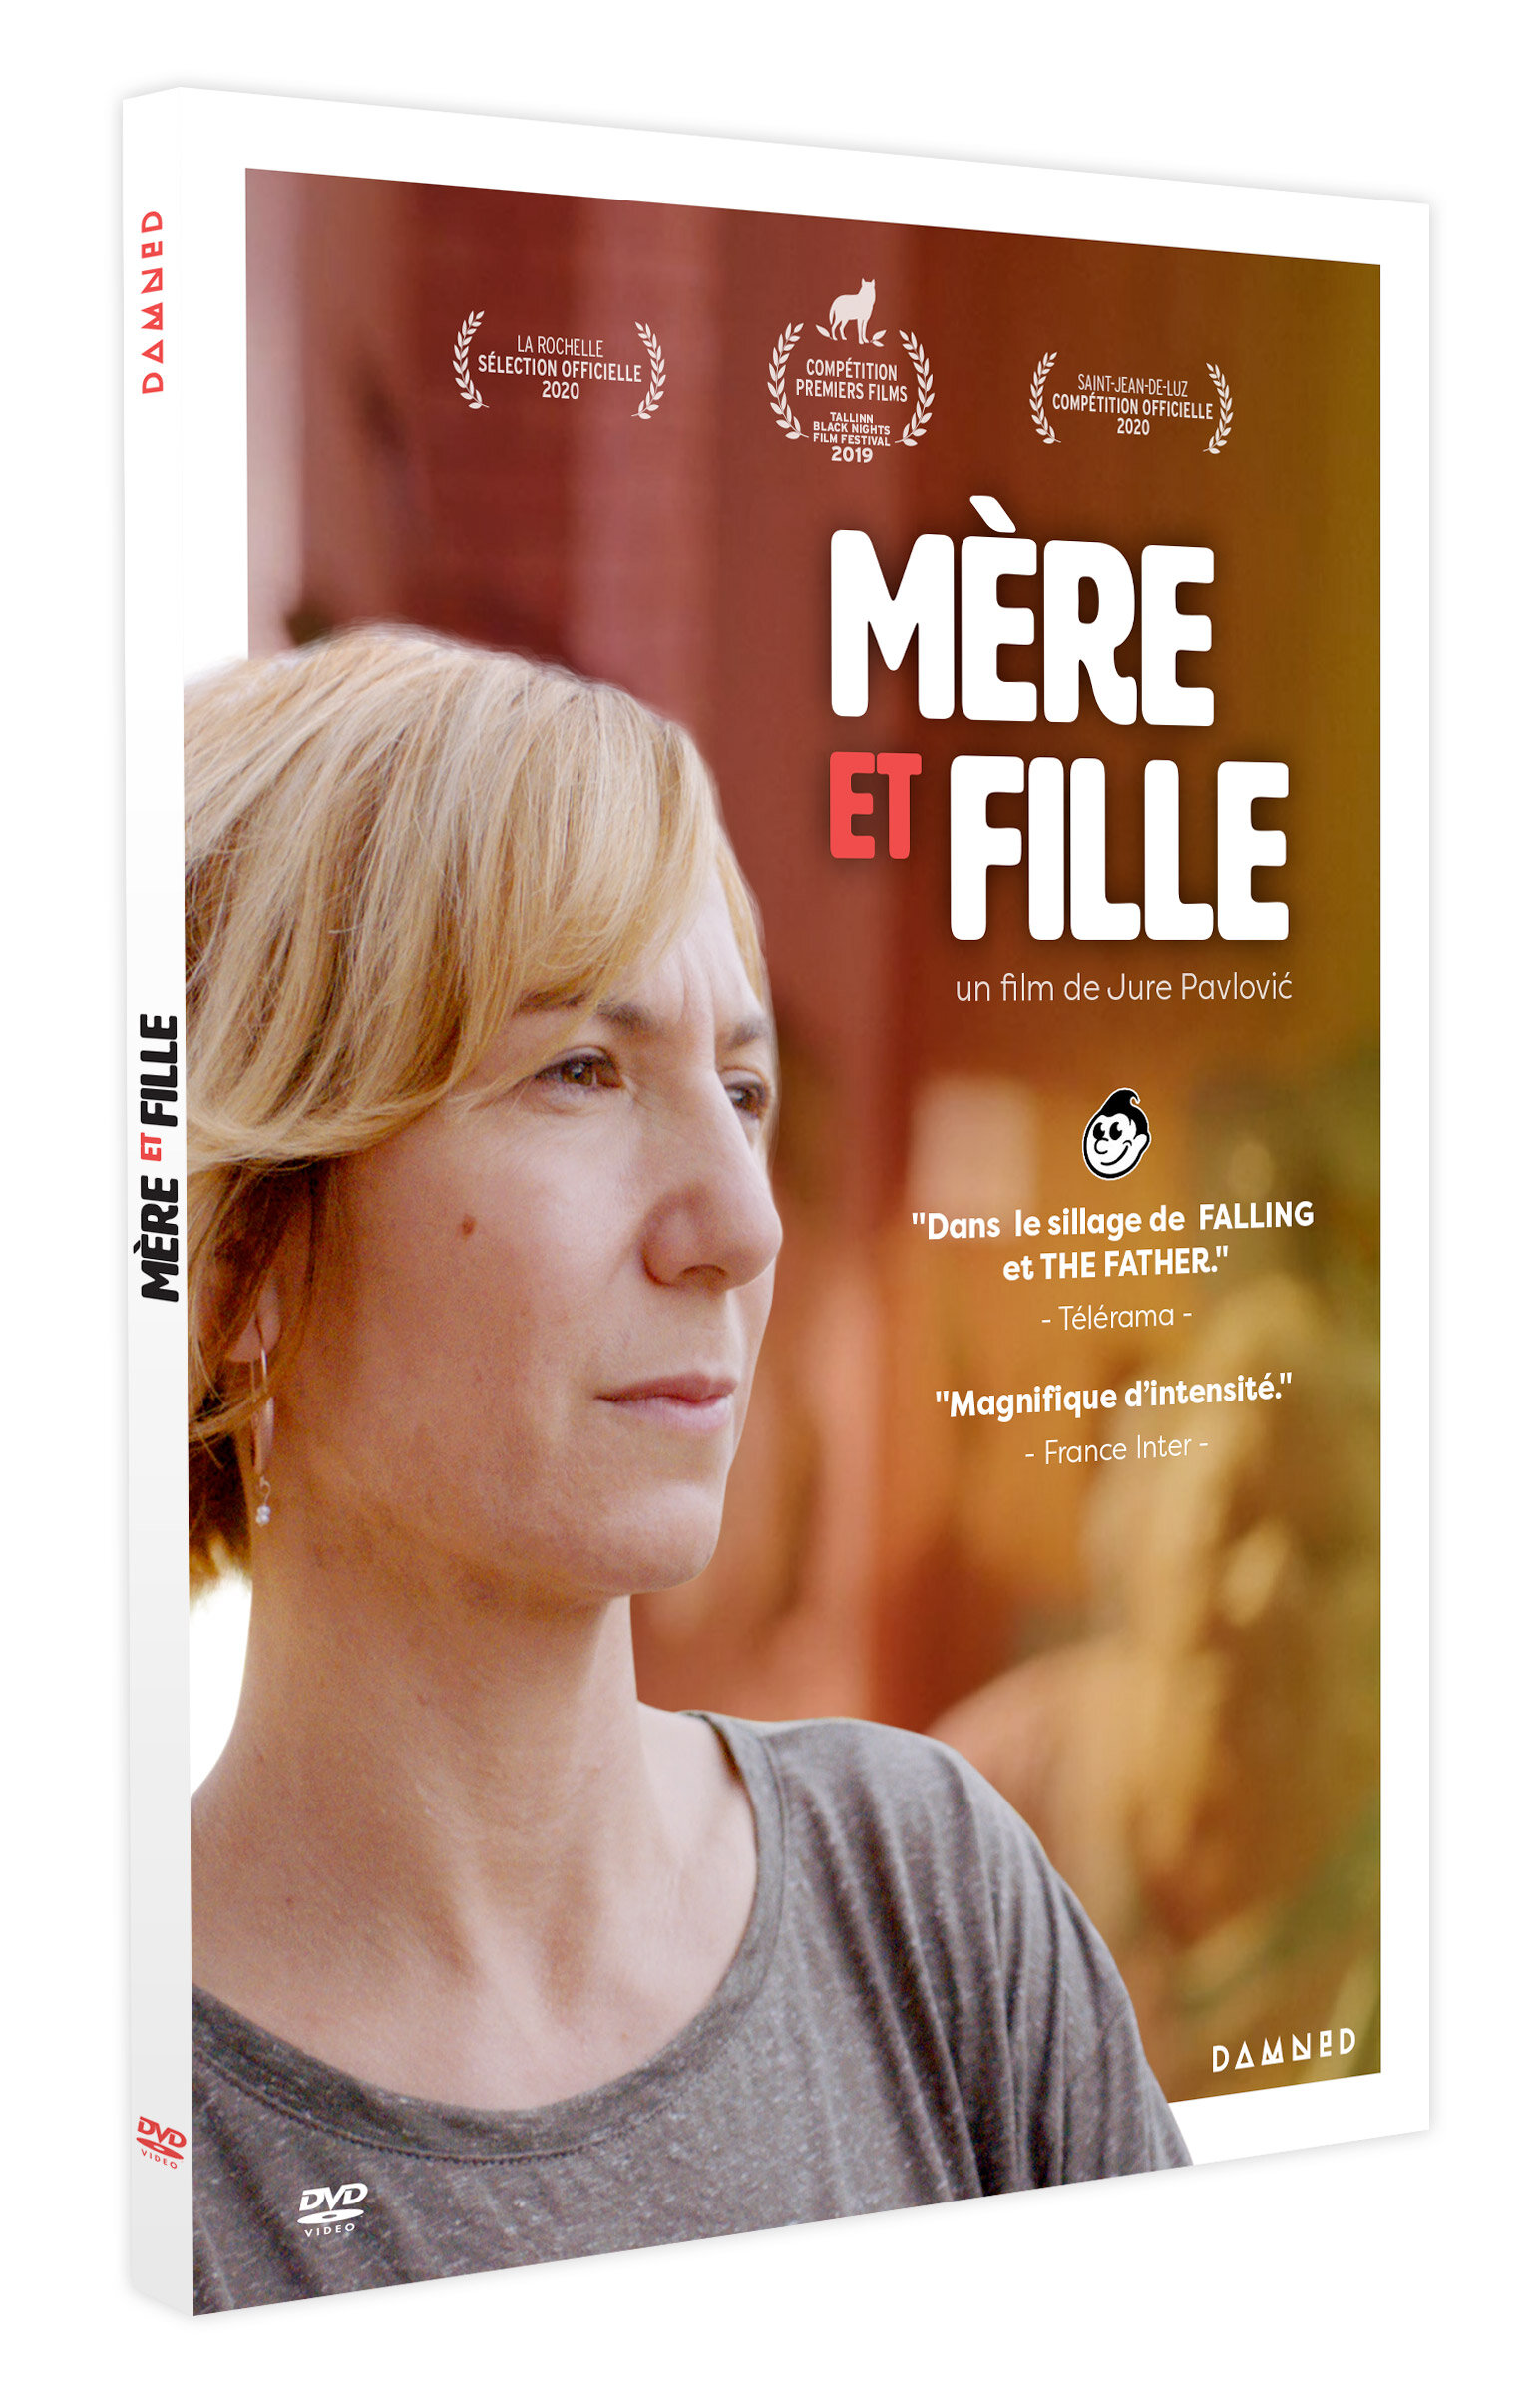 alyssa sherwood recommends ma mere english subtitles pic